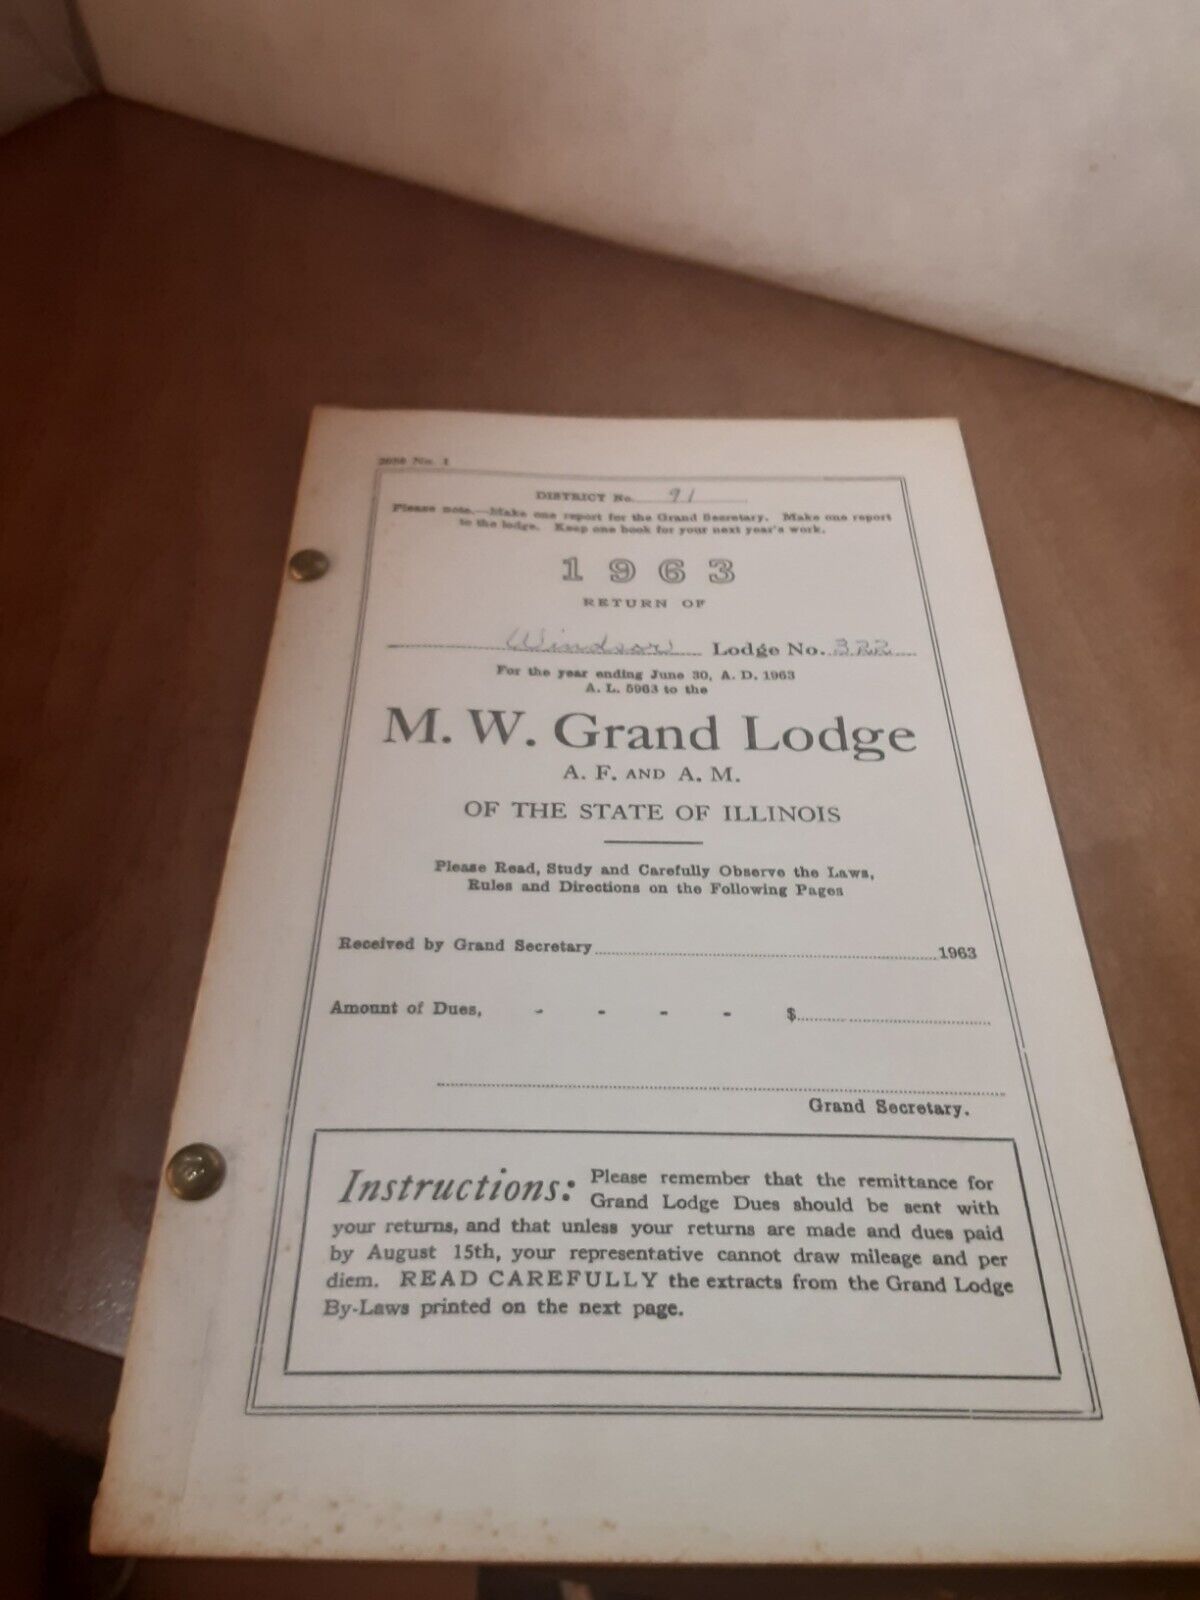 Antique Masonic Official Grand Lodge of the State of Illinois Lodge Report 1963